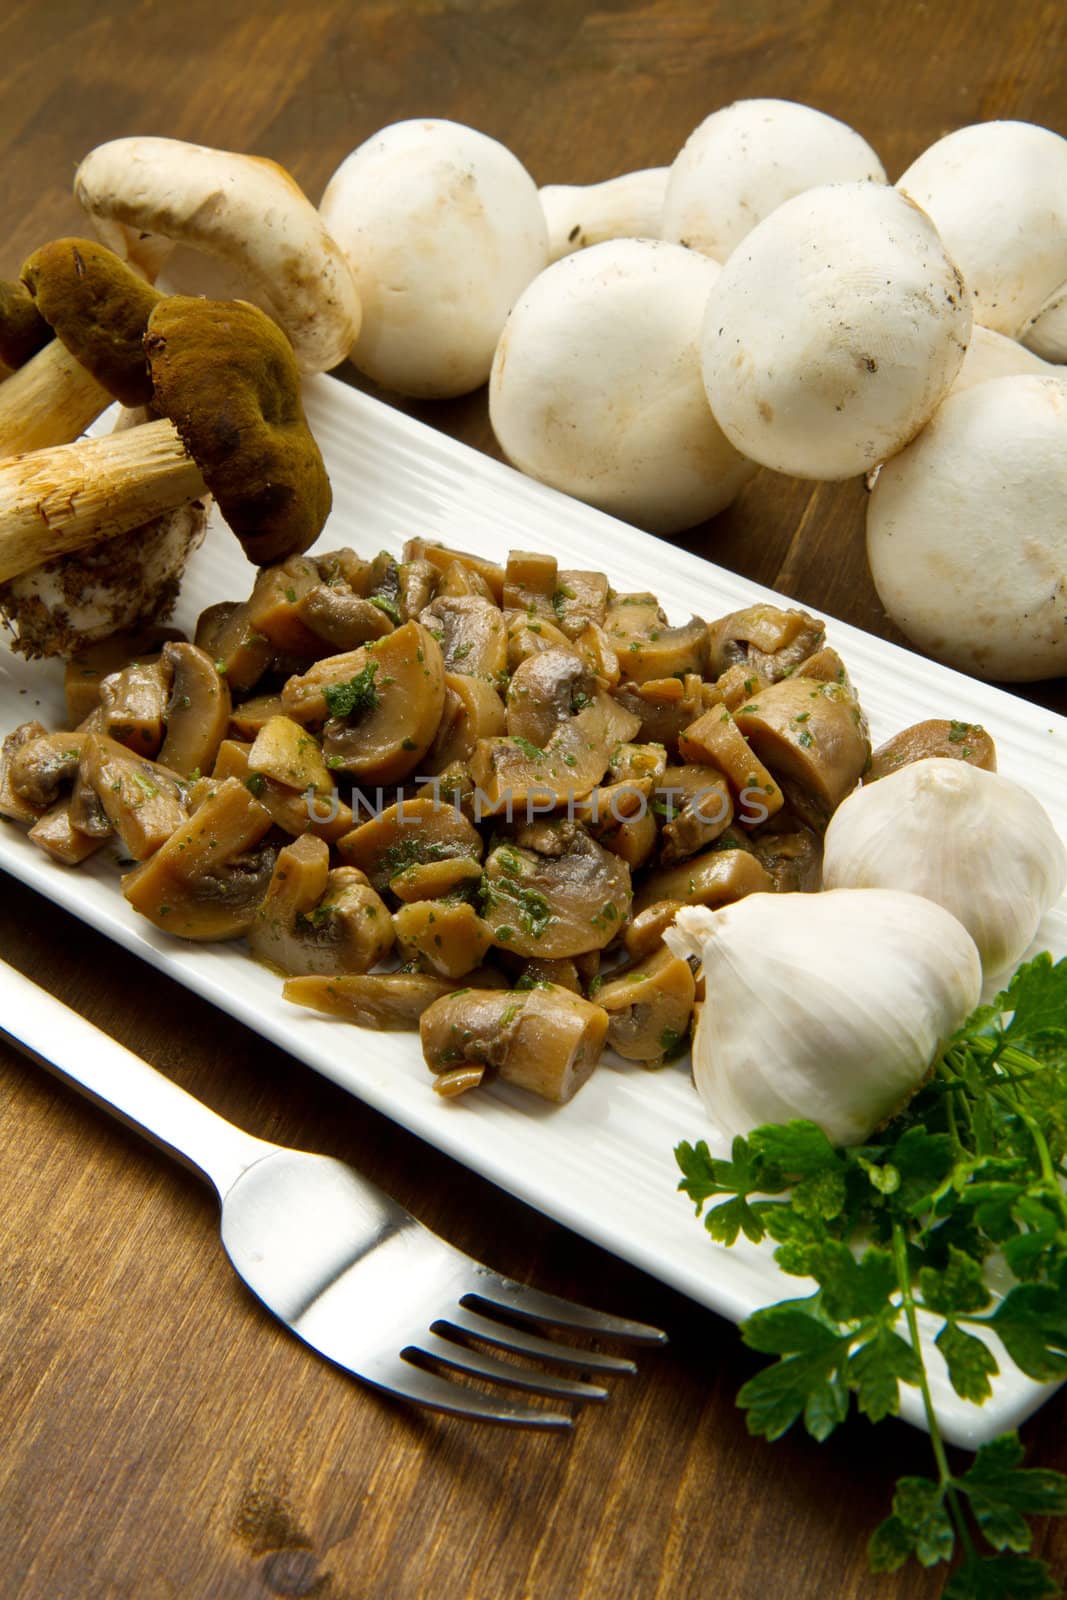 cooked and fresh mushrooms  with garlic and parsley